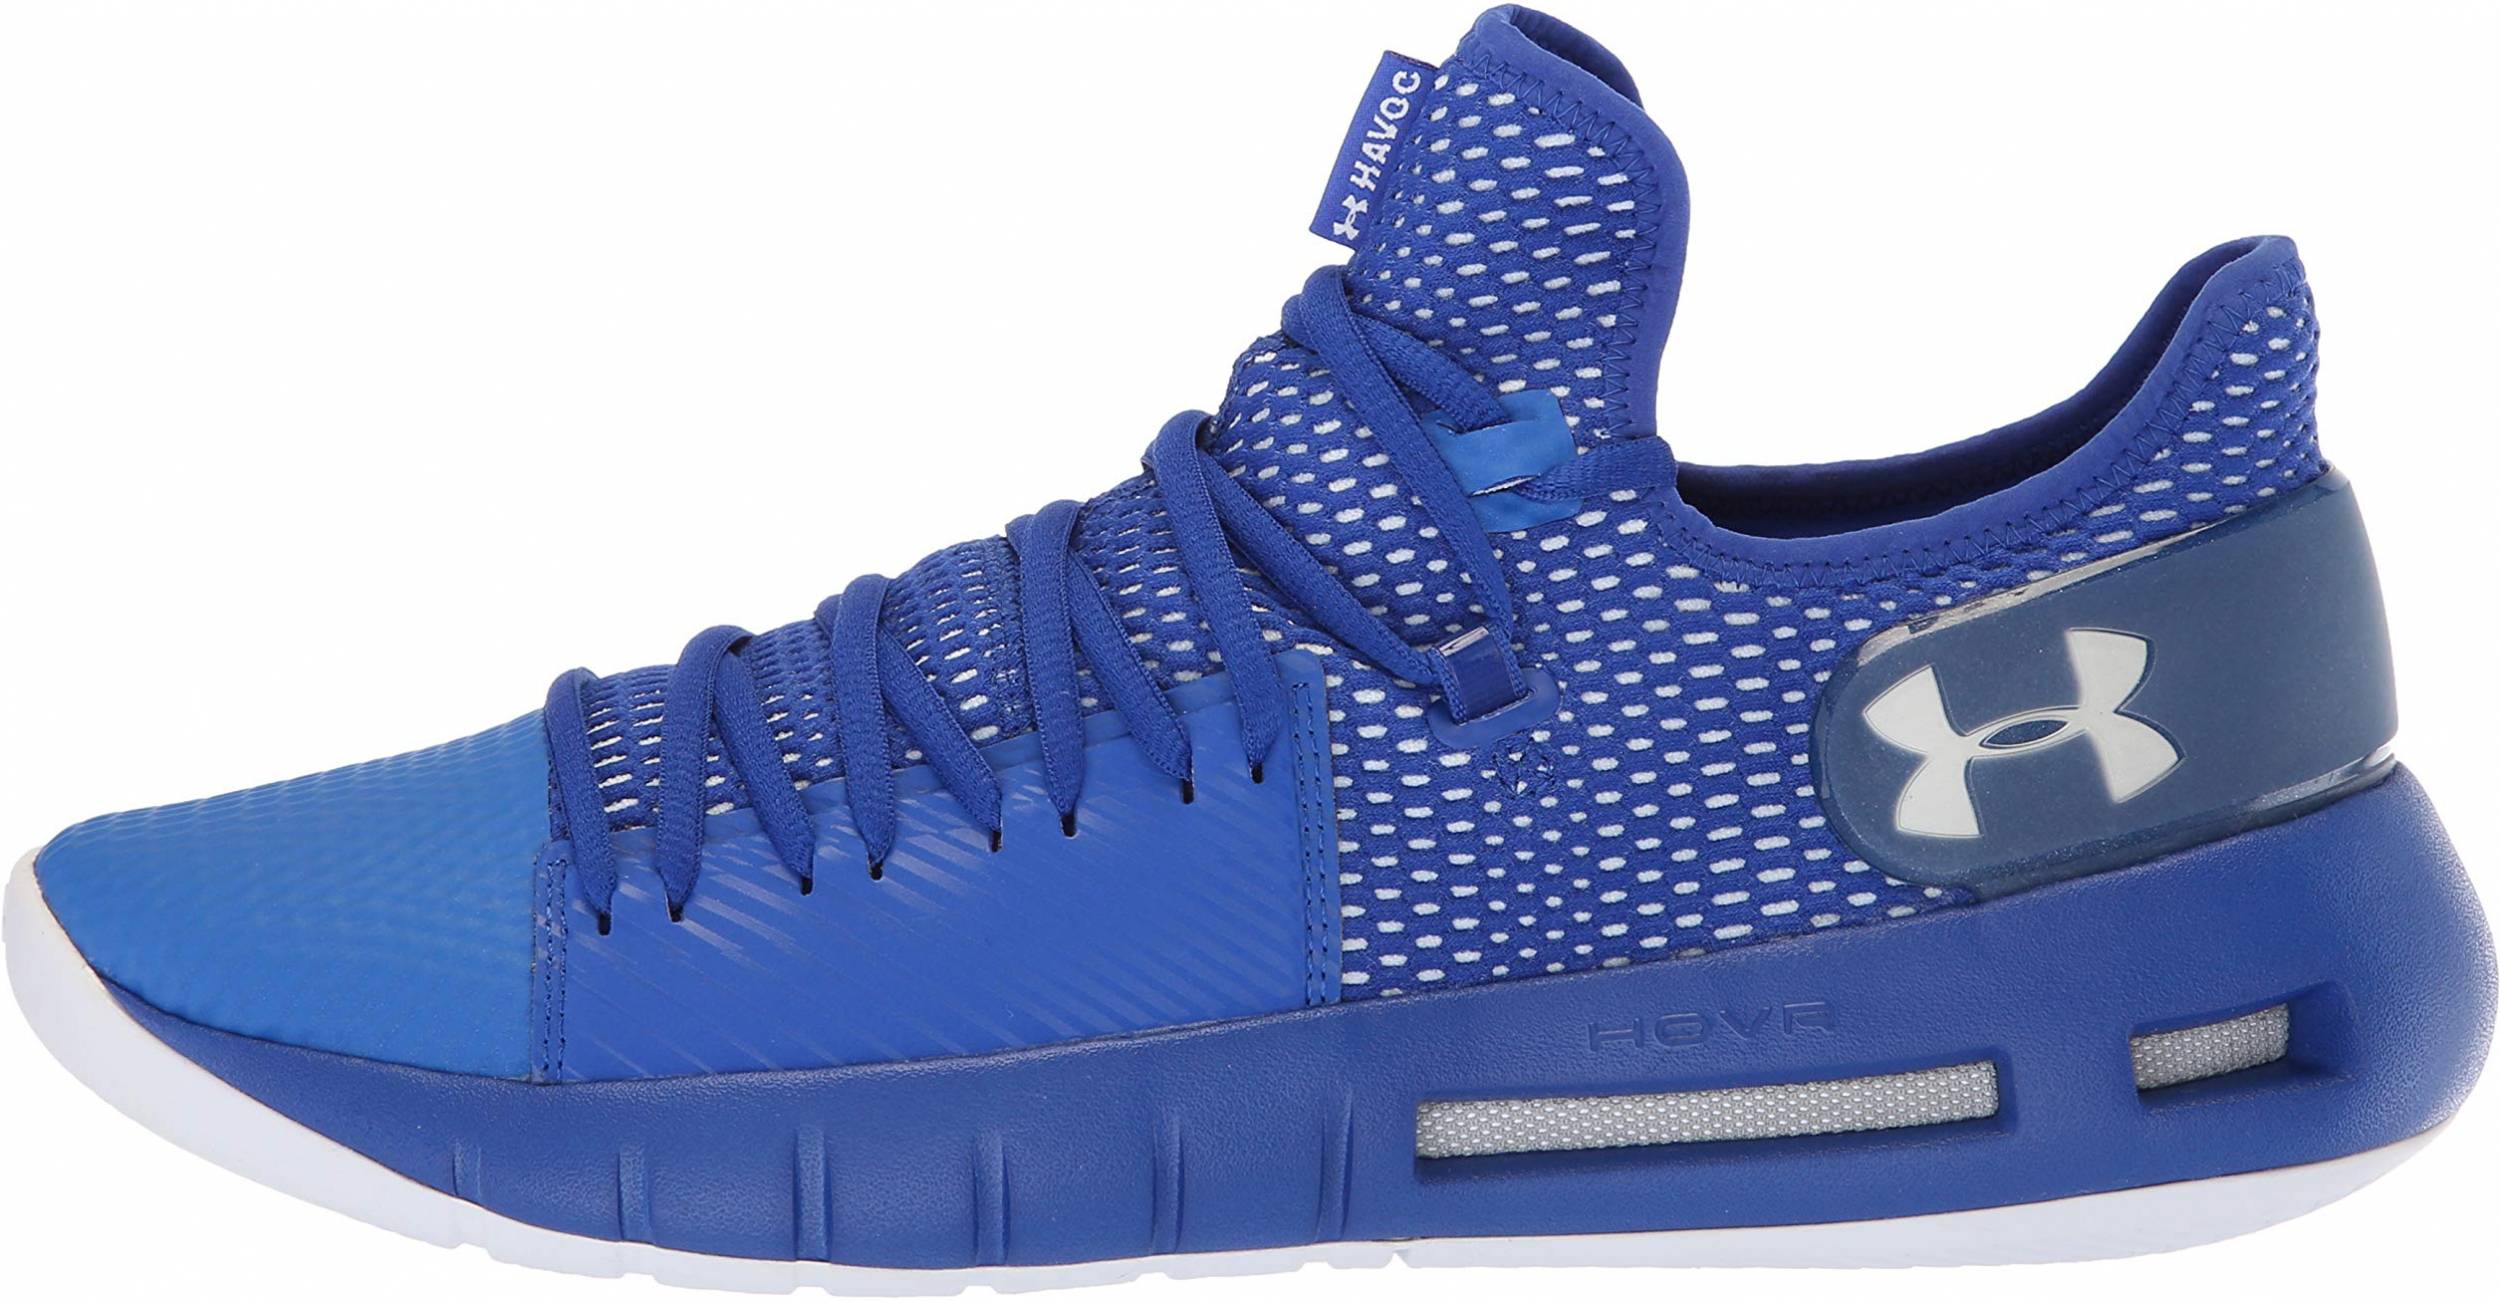 blue under armour basketball shoes